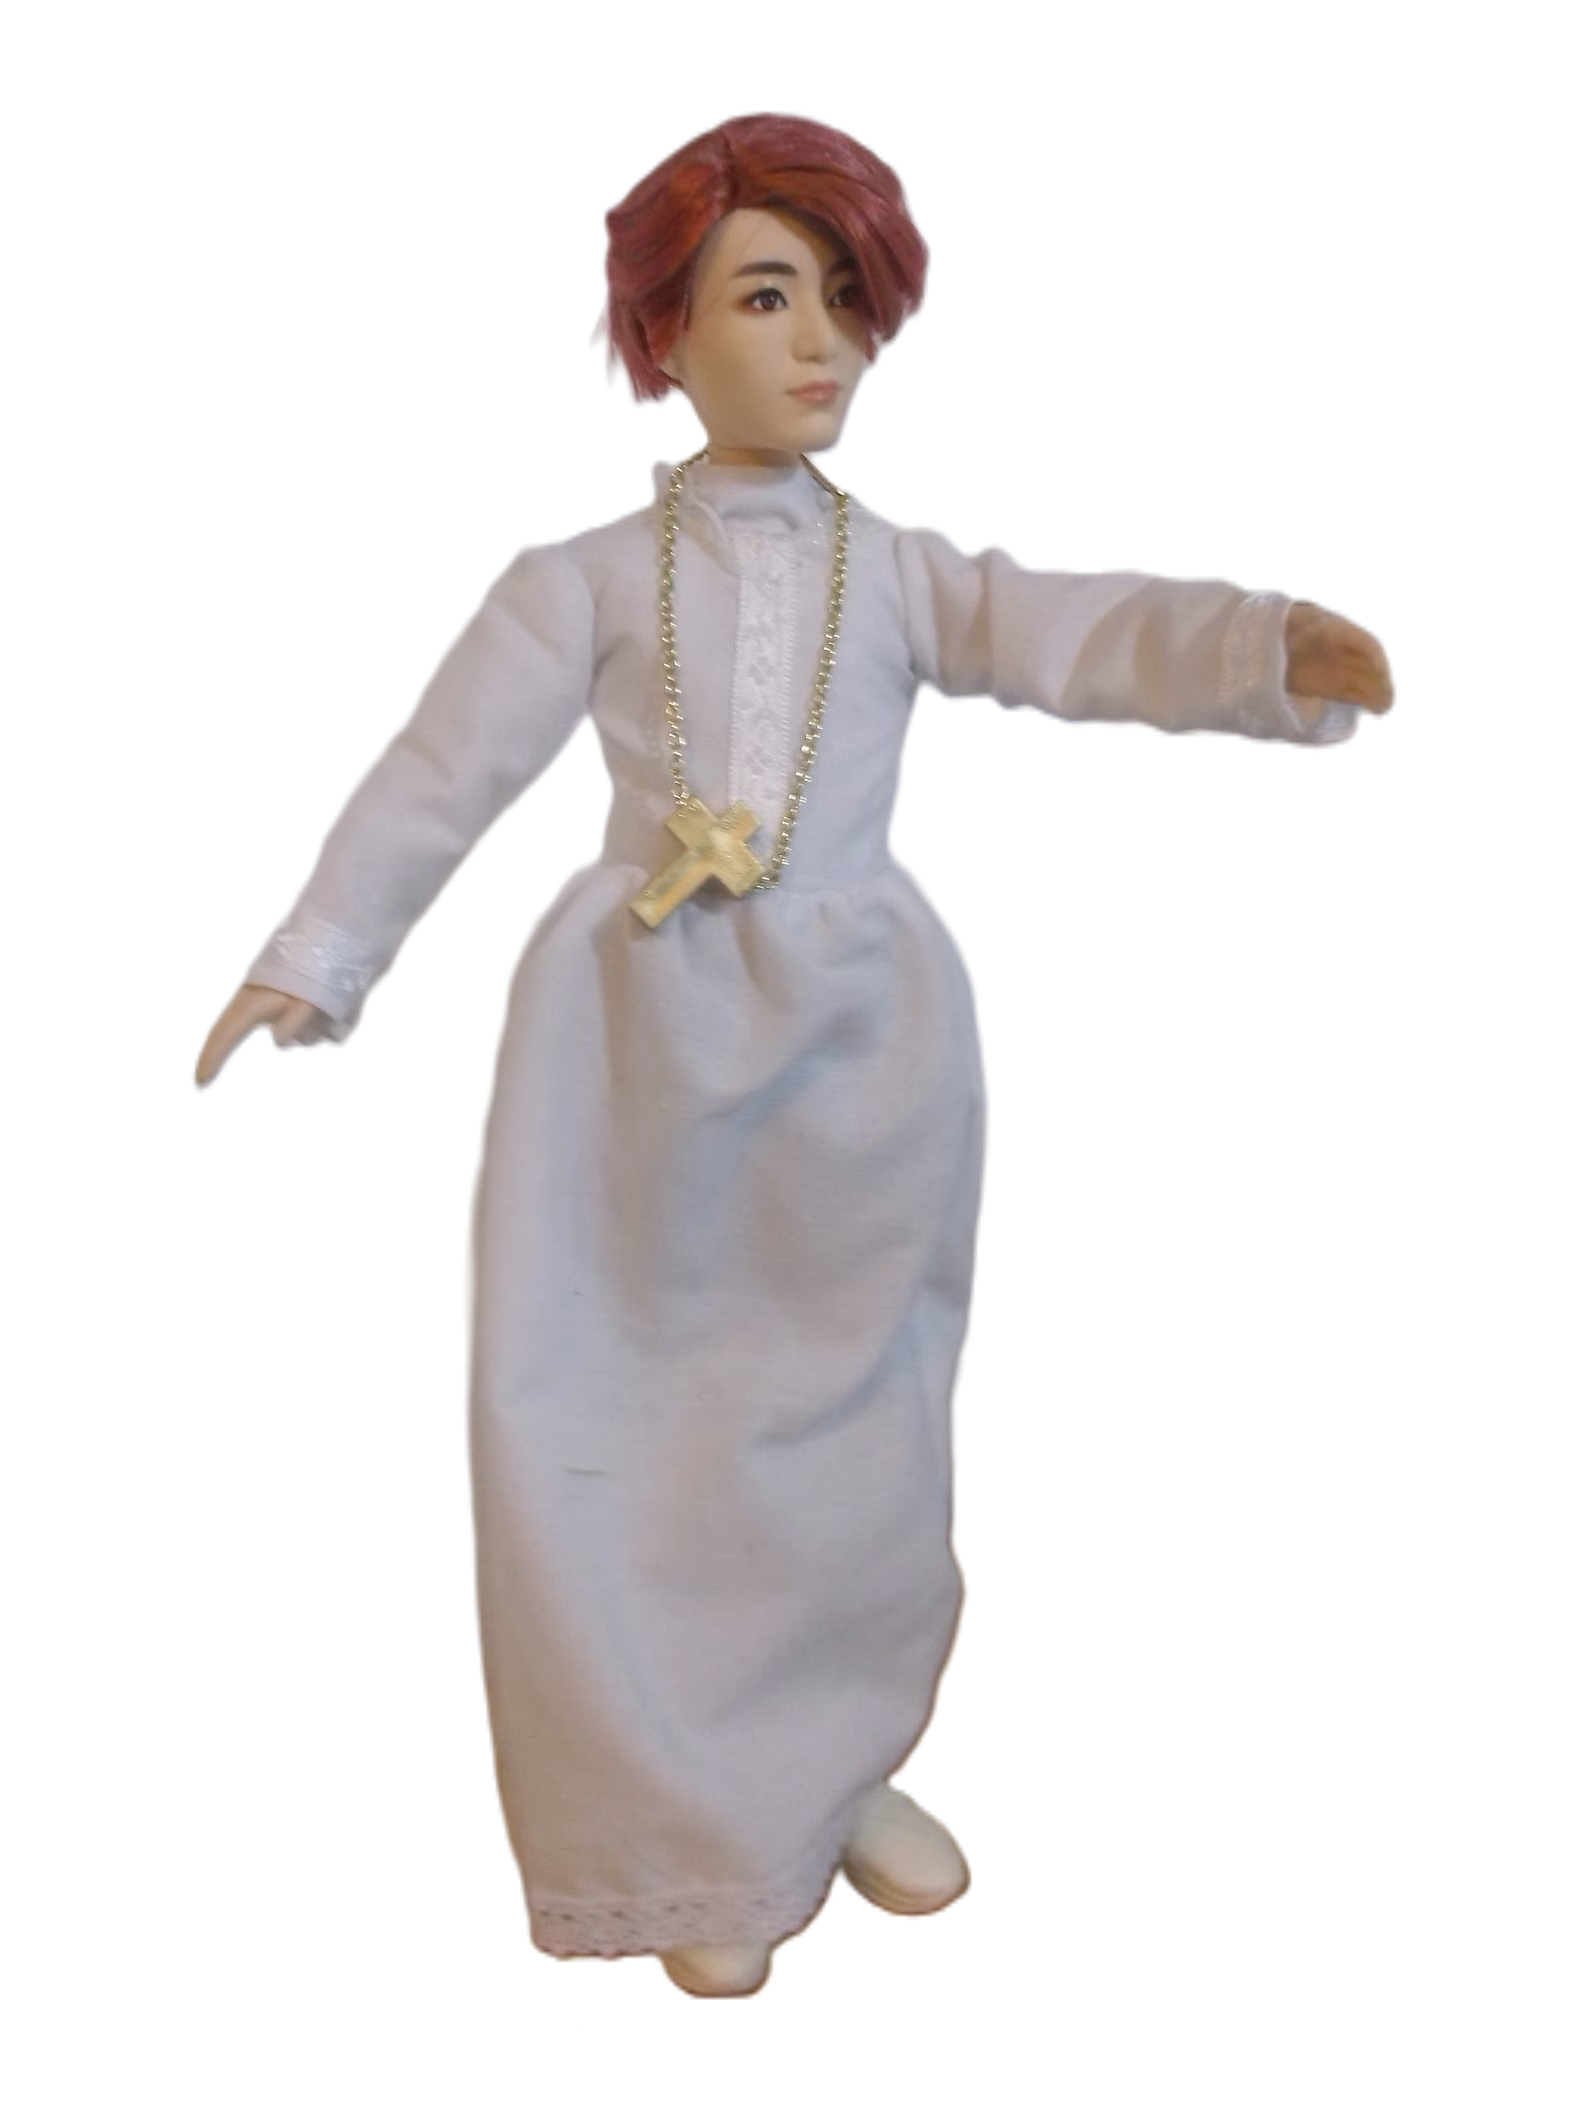 A photograph of a doll of Jeon Jungkook wearing the traditional vestments of a Catholic alter boy.